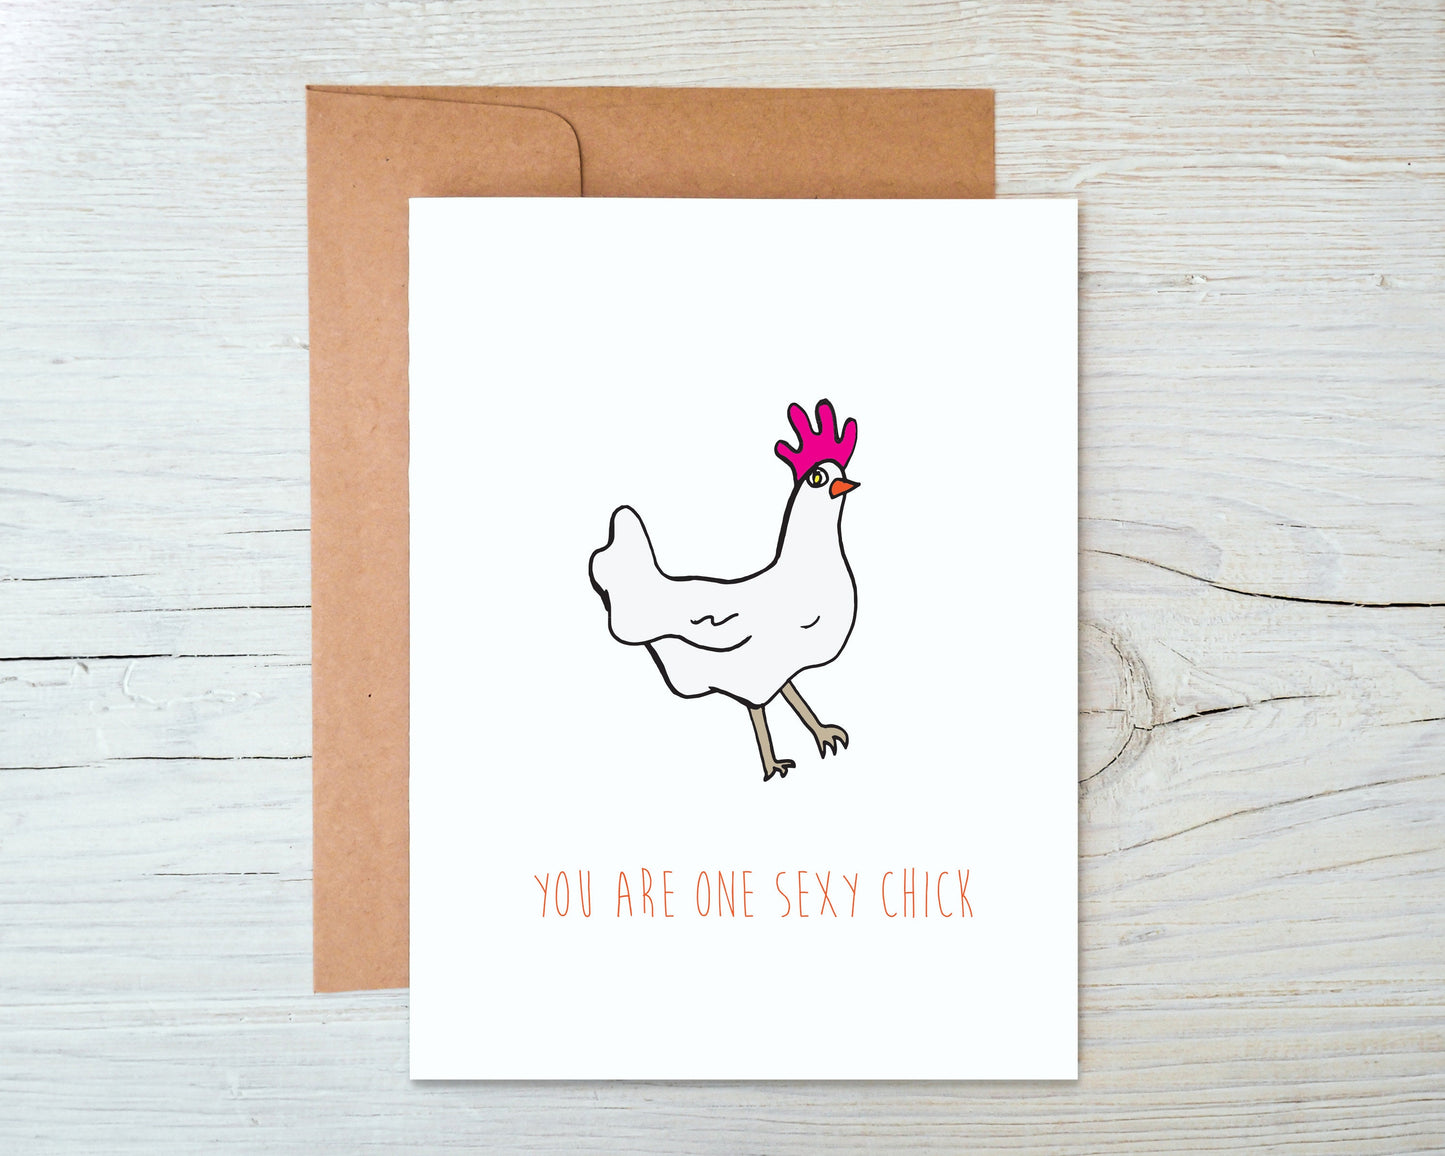 You Are One Sexy Chick Greeting Card